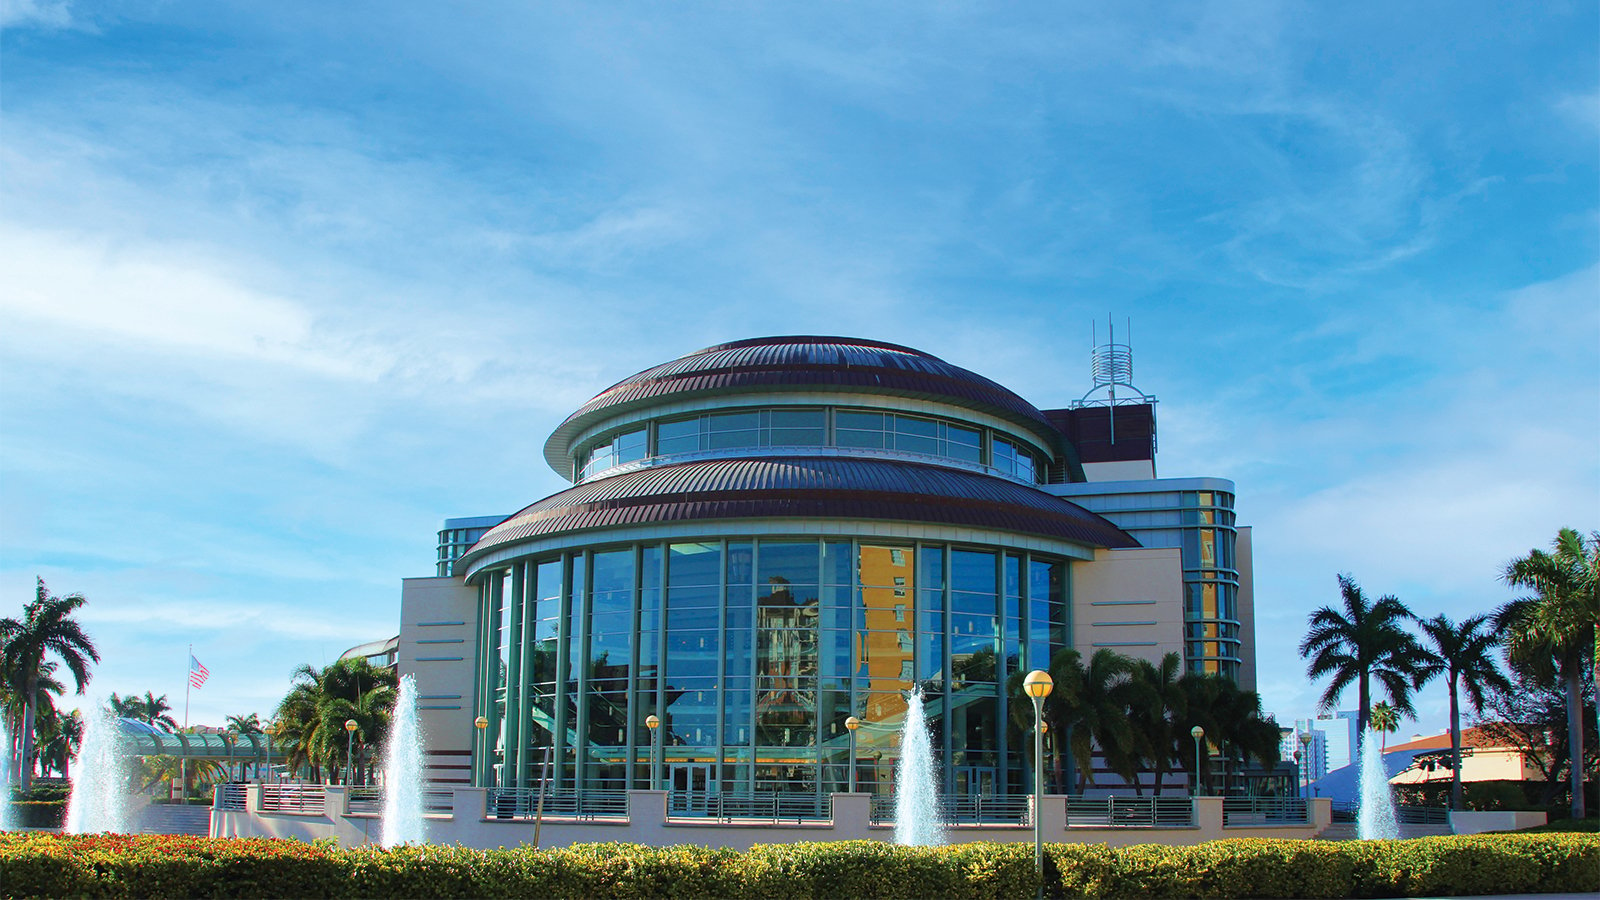 Raymond F Kravis Center for the Performing Arts